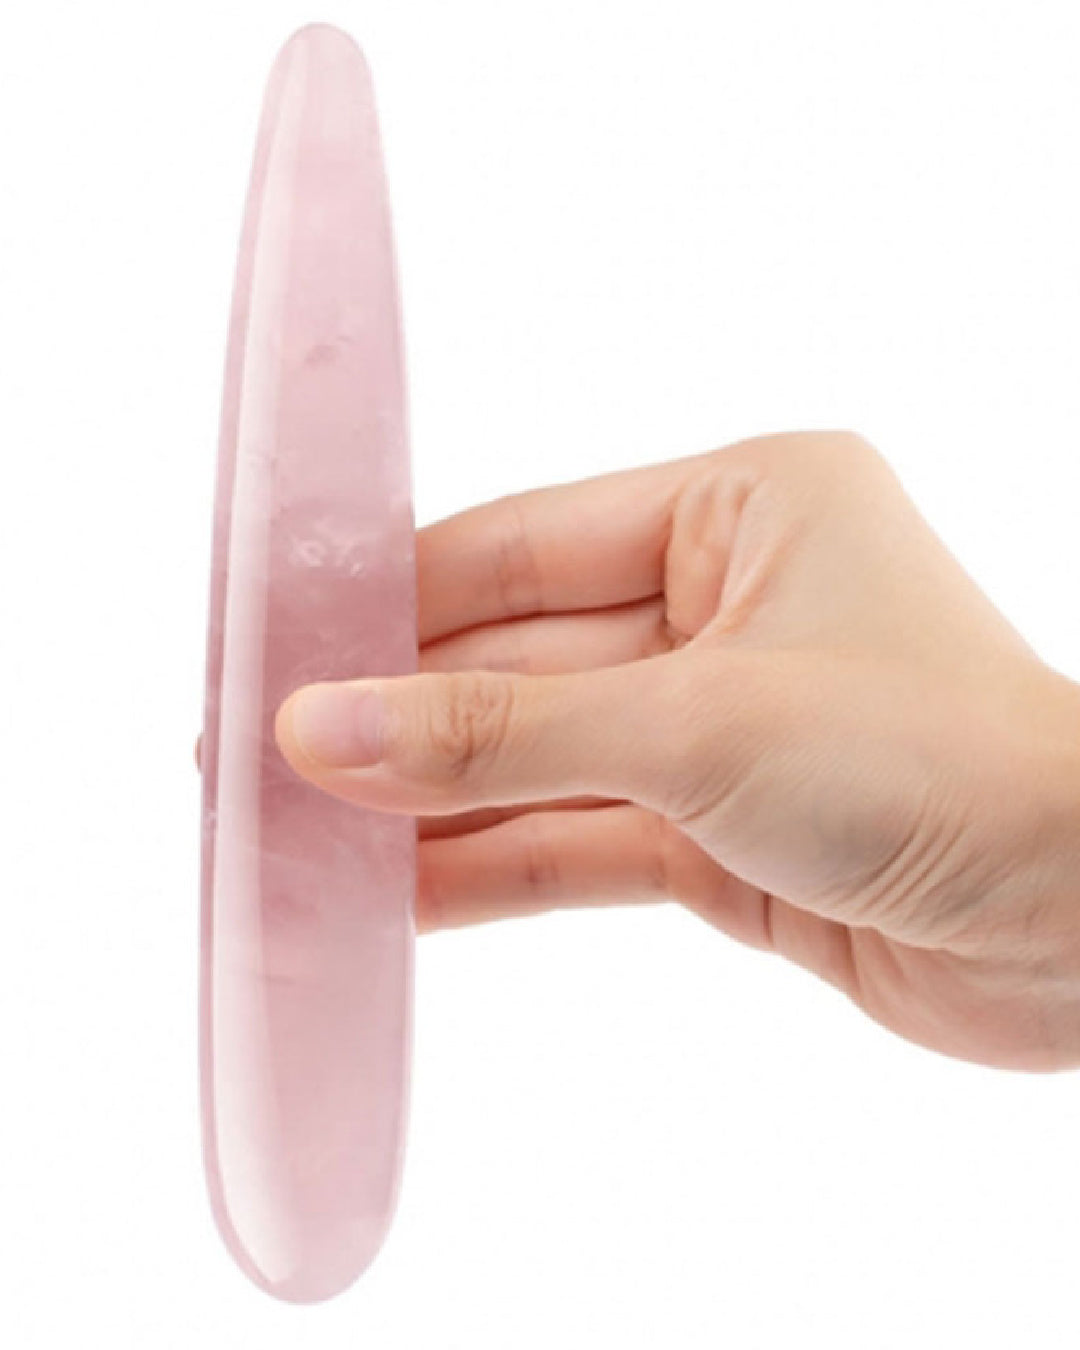 Le Wand Crystal Slim  Wand - Rose Quartz held in model's hand 